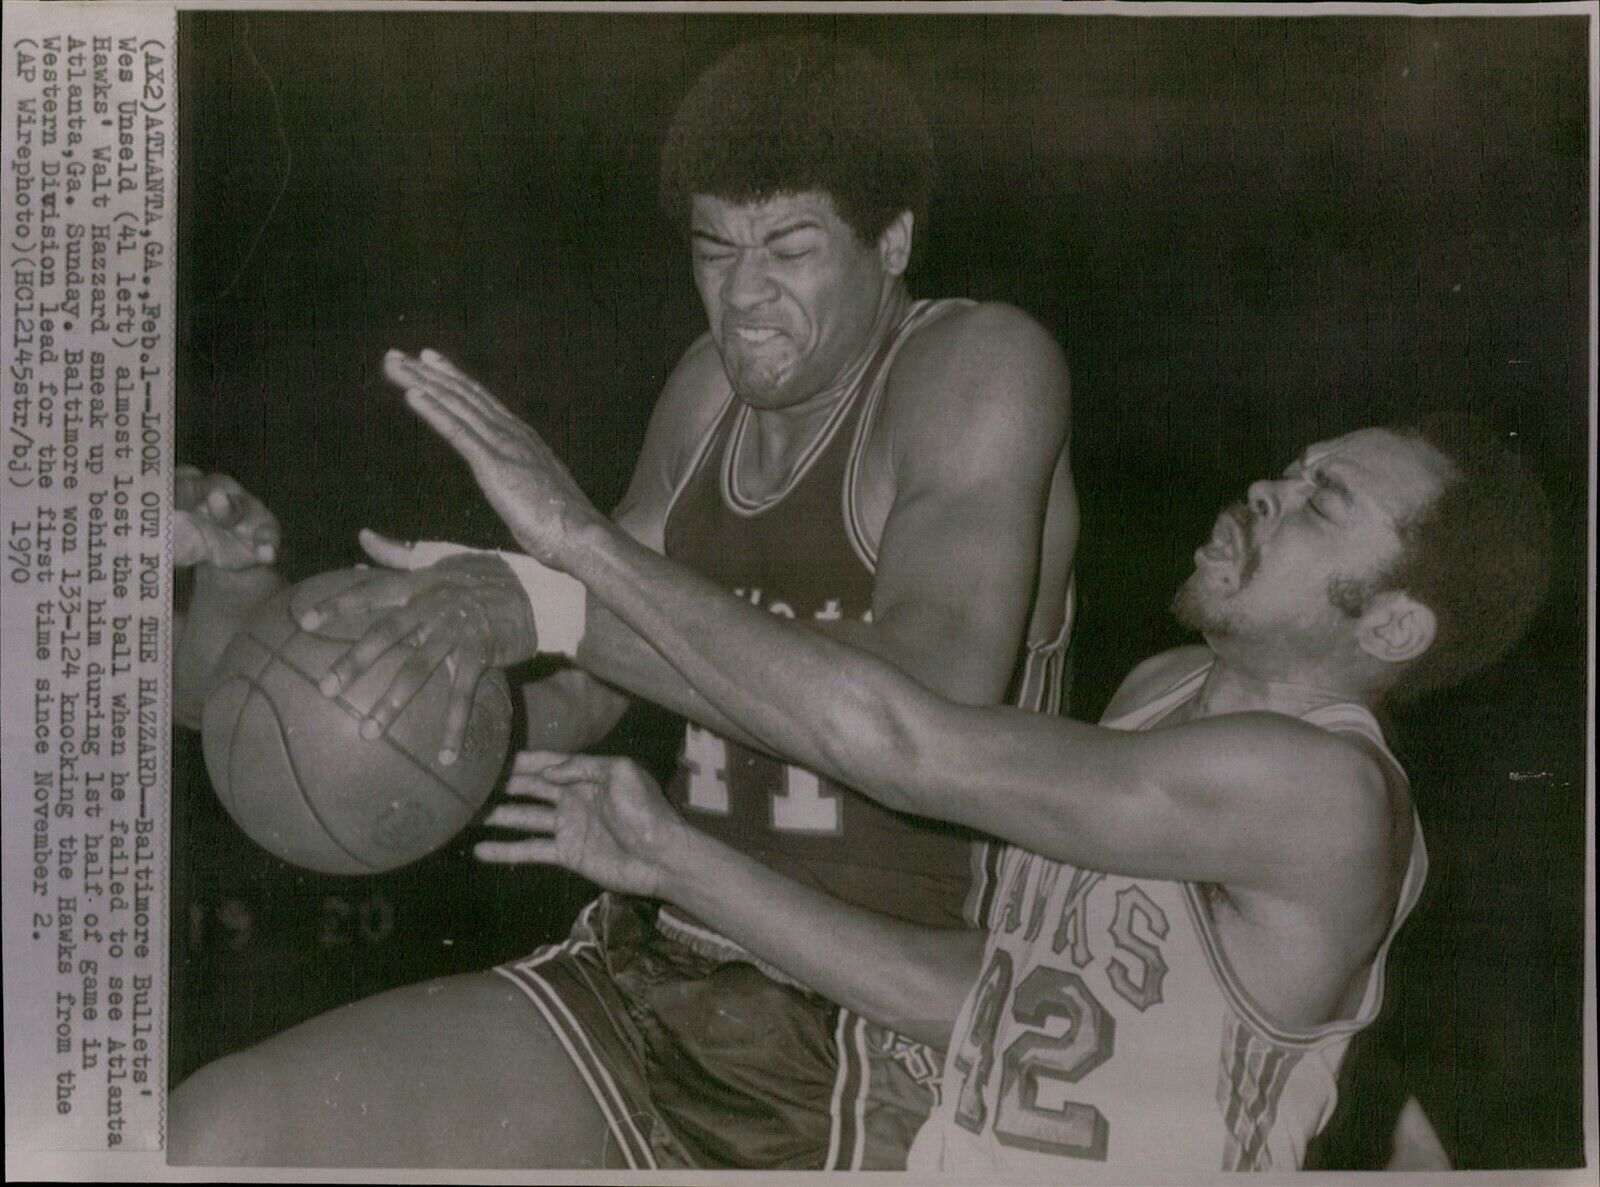 LG830 \'70 Wire Photo LOOK OUT FOR THE HAZZARD Wes Unseld Baltimore Bullets Hawks